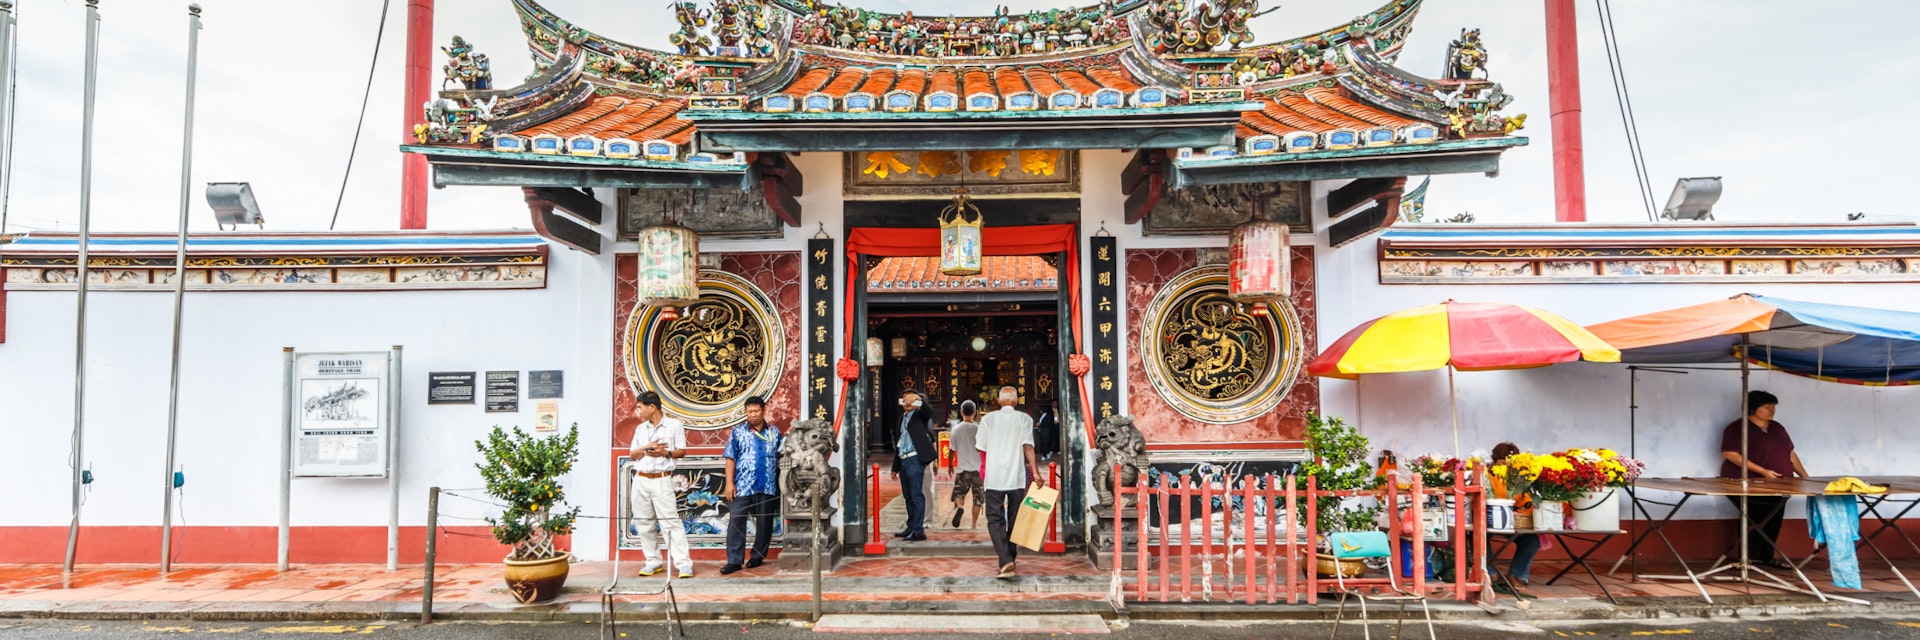 MALACCA, MALAYSIA - DECEMBER 23: Tourists visit Cheng Hoon Teng Temple at Malacca city on Dec 23, 2013 in Malacca, Malaysia. Malacca has been listed as a UNESCO World Heritage Site since 7 July 2008.; Shutterstock ID 175419539; Your name (First / Last): Lauren Gillmroe; GL account no.: 56530; Netsuite department name: Online-Design; Full Product or Project name including edition: 65050/ Online Design /LaurenGillmore/POI